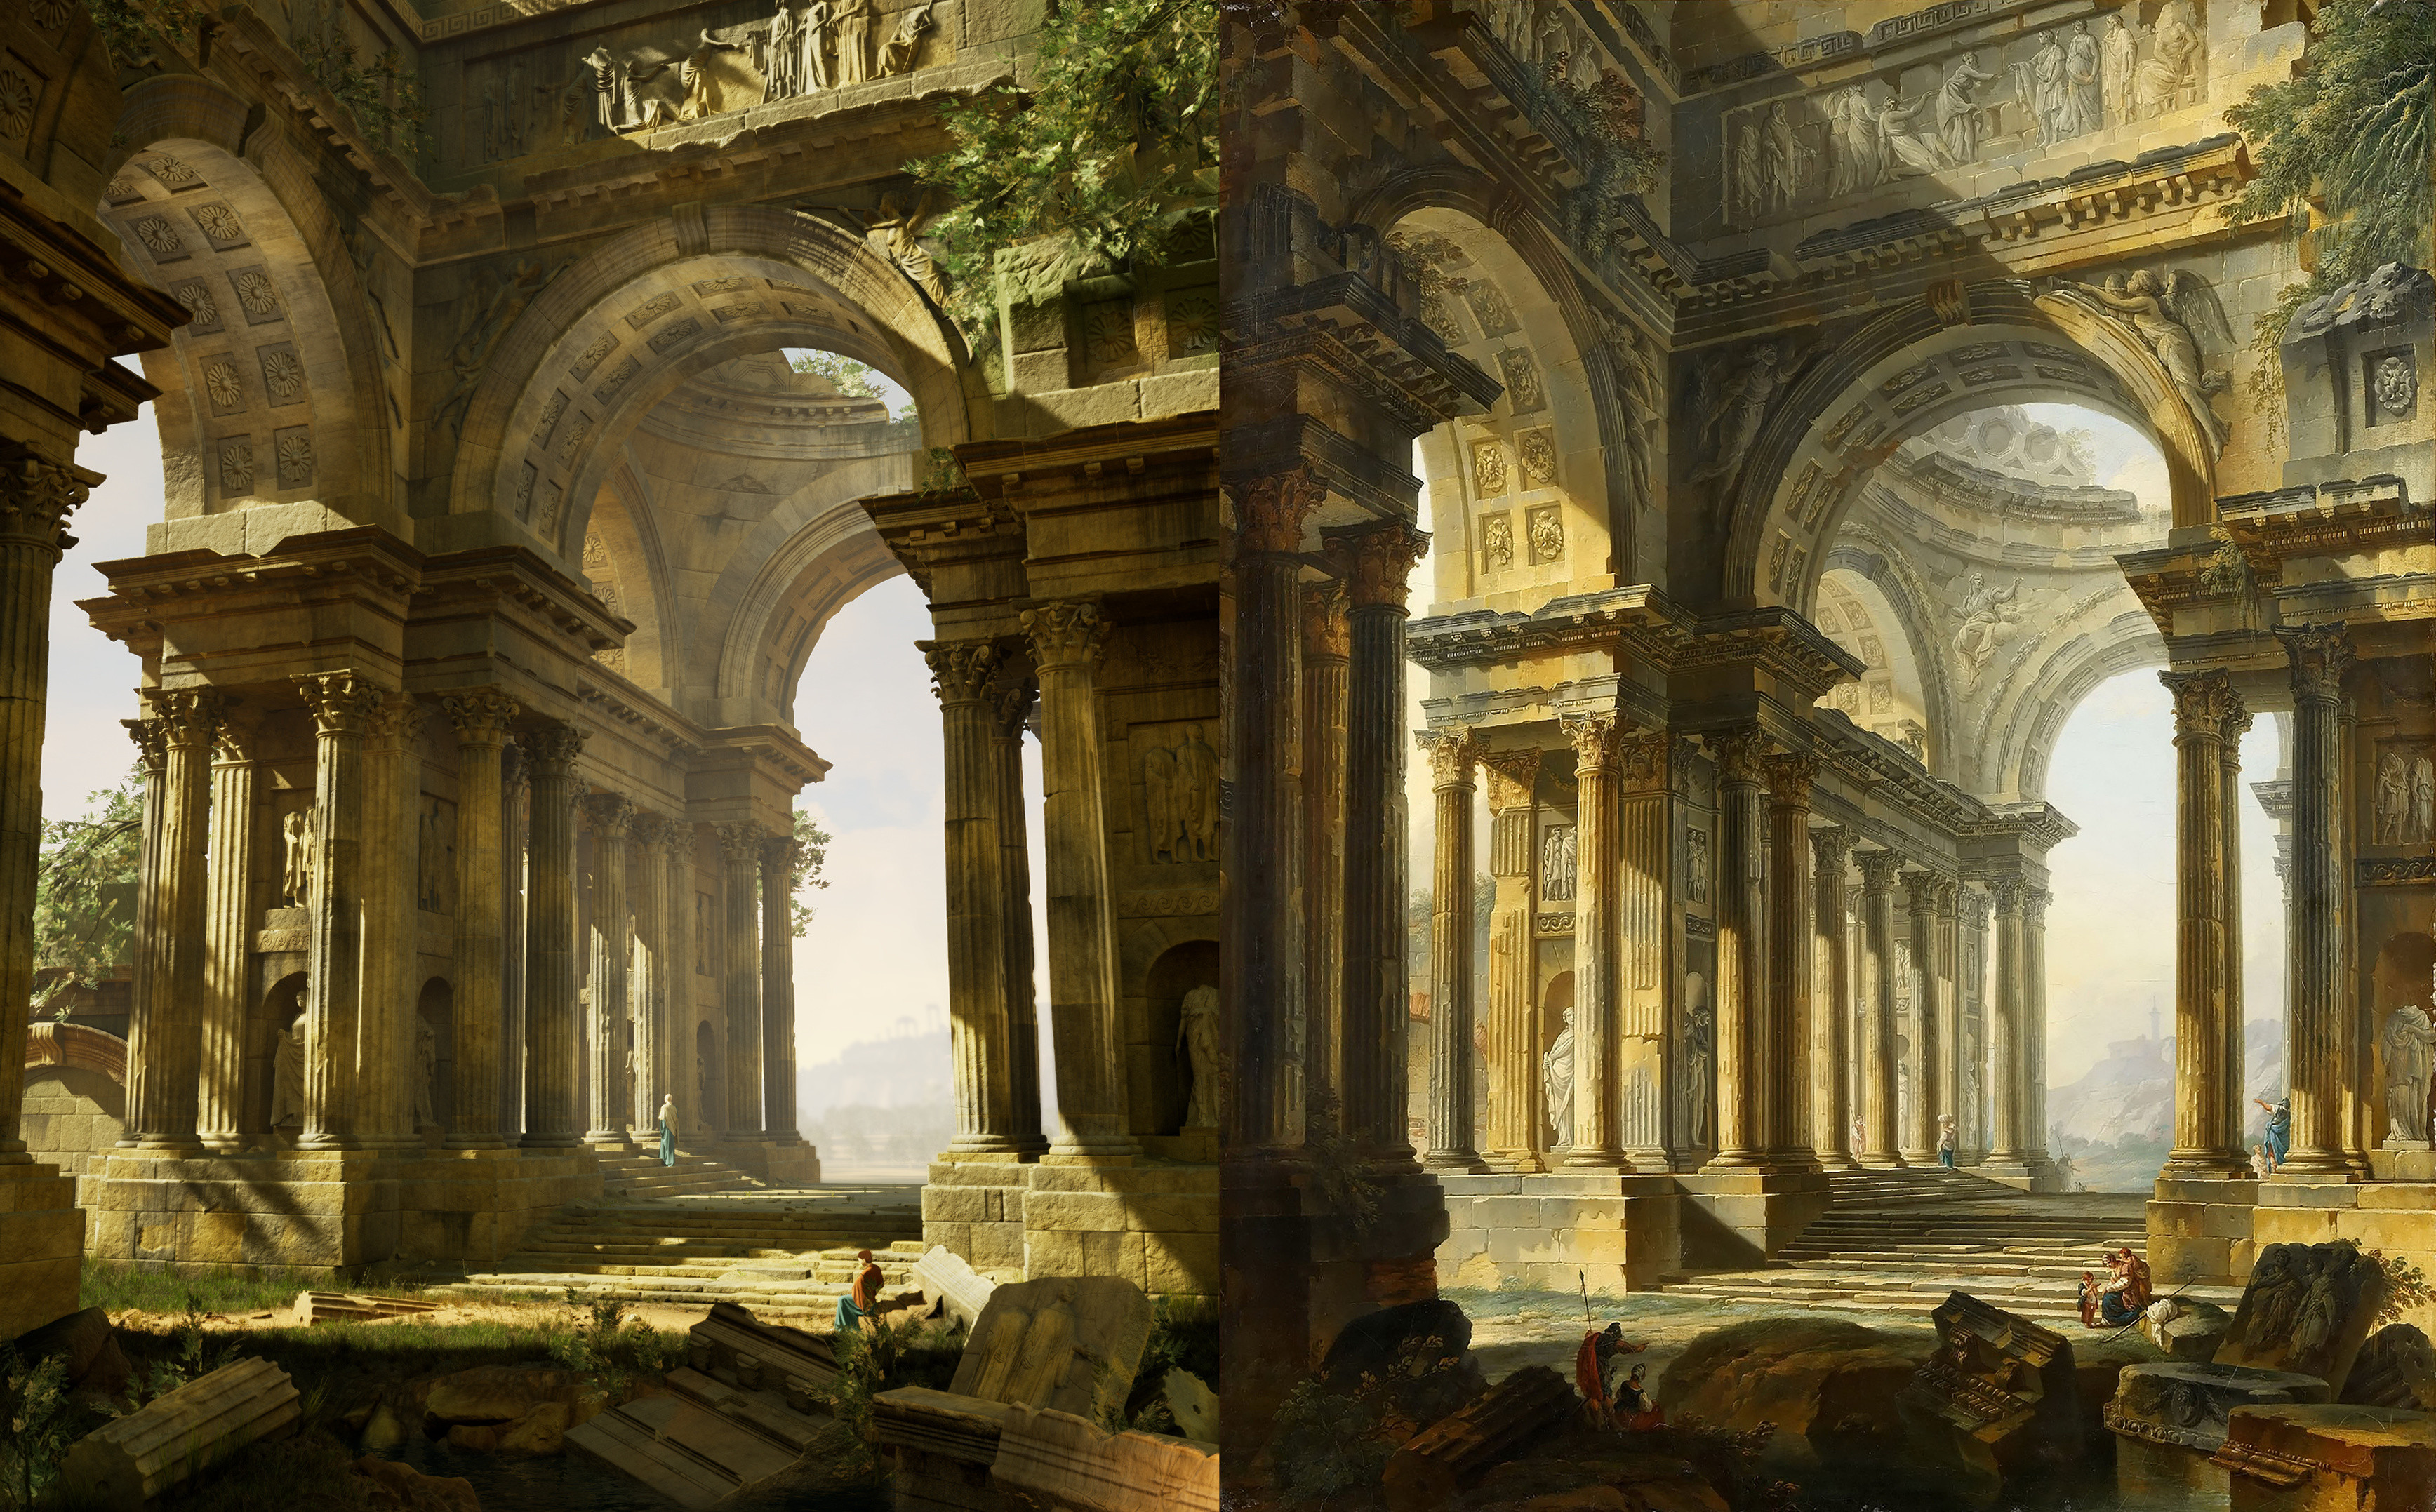 Comparison of the UE4 scene on the left with the original painting on the right